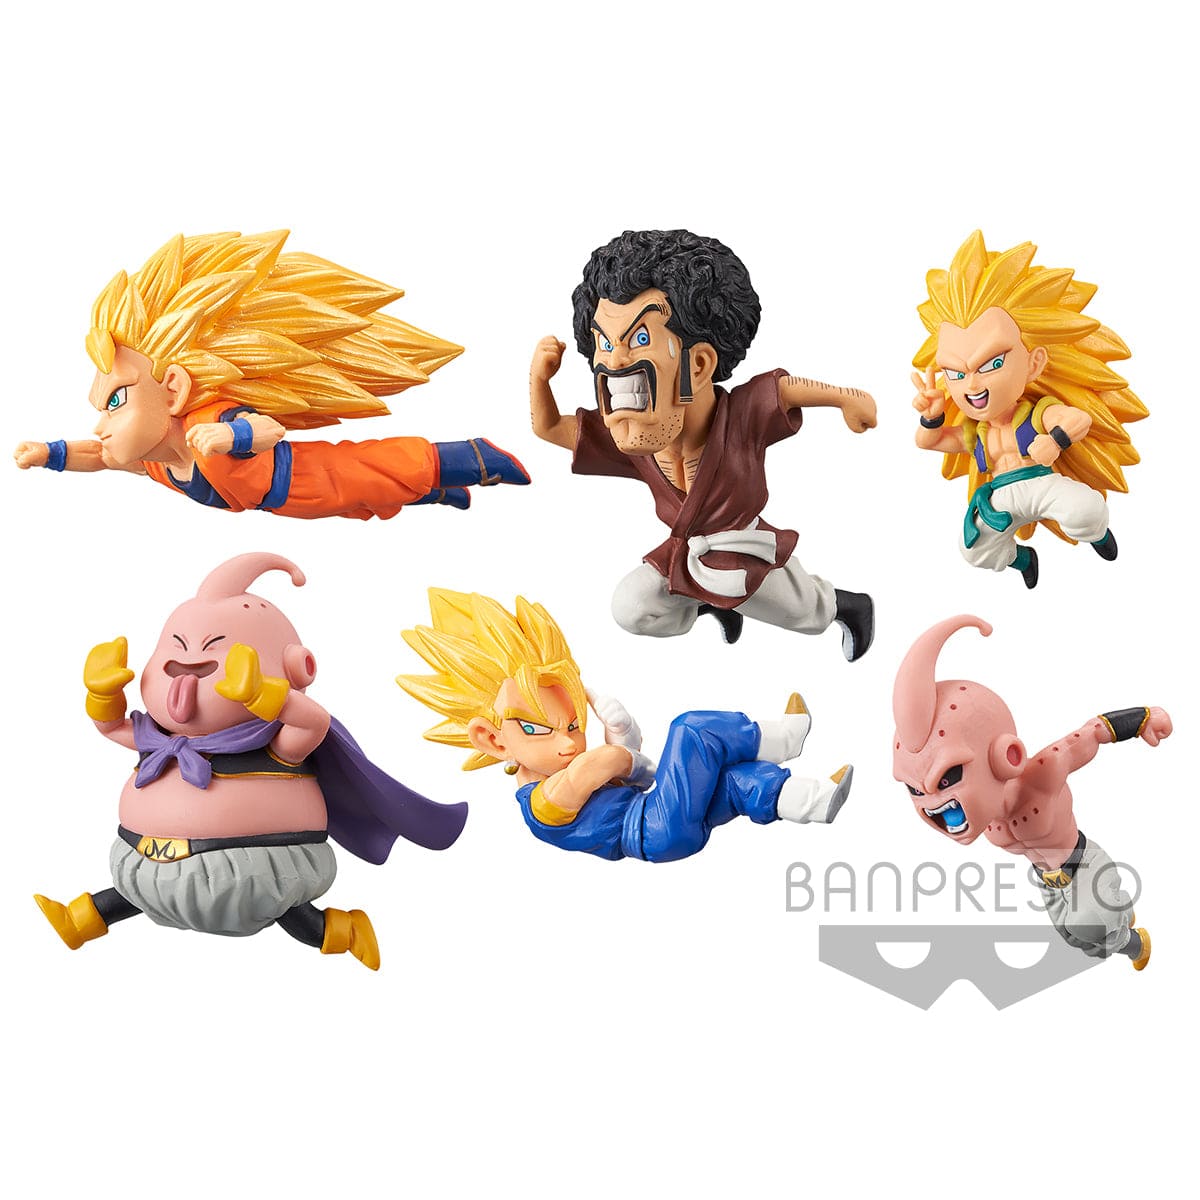 Banpresto 20 DRAGON BALL Z WORLD COLLECTABLE FIGURE -THE HISTORICAL CHARACTERS- VOL.3 (SET)